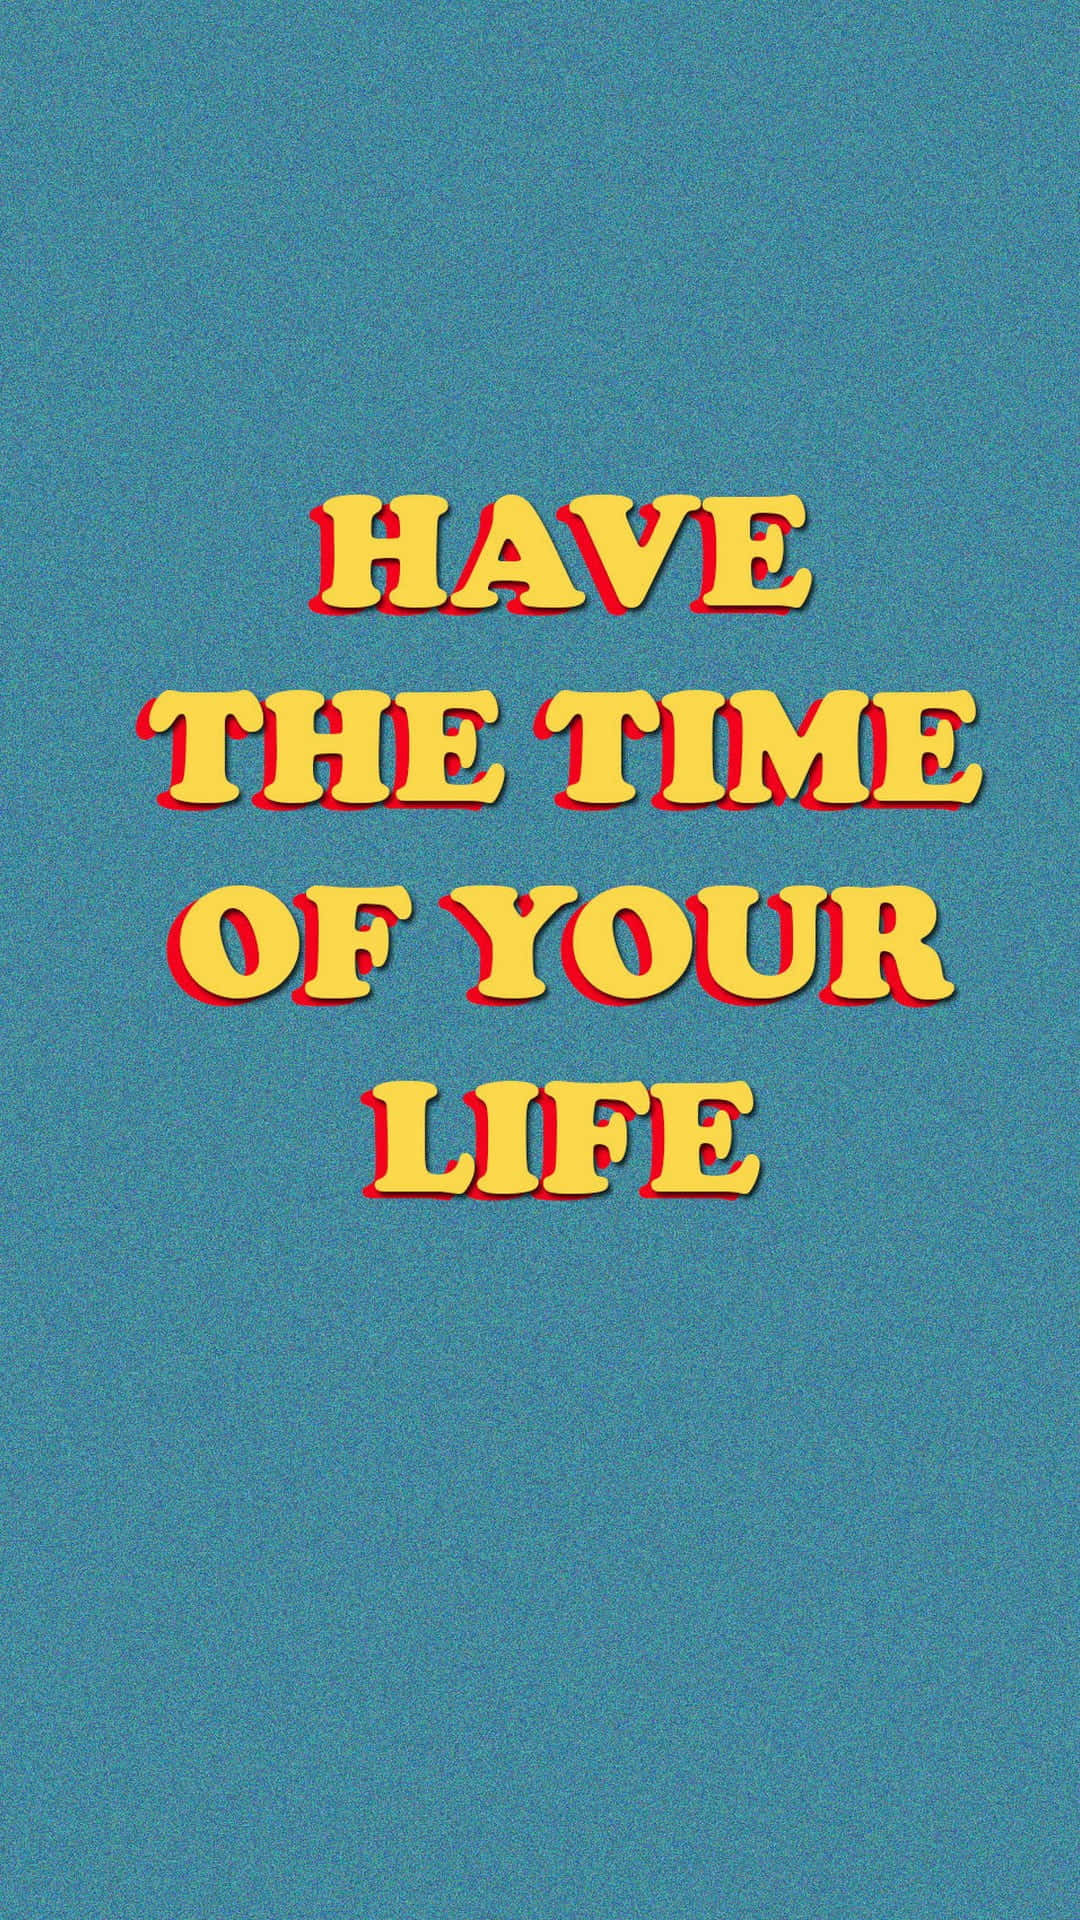 Time Of Your Life_ Positive Quote Aesthetic.jpg Wallpaper